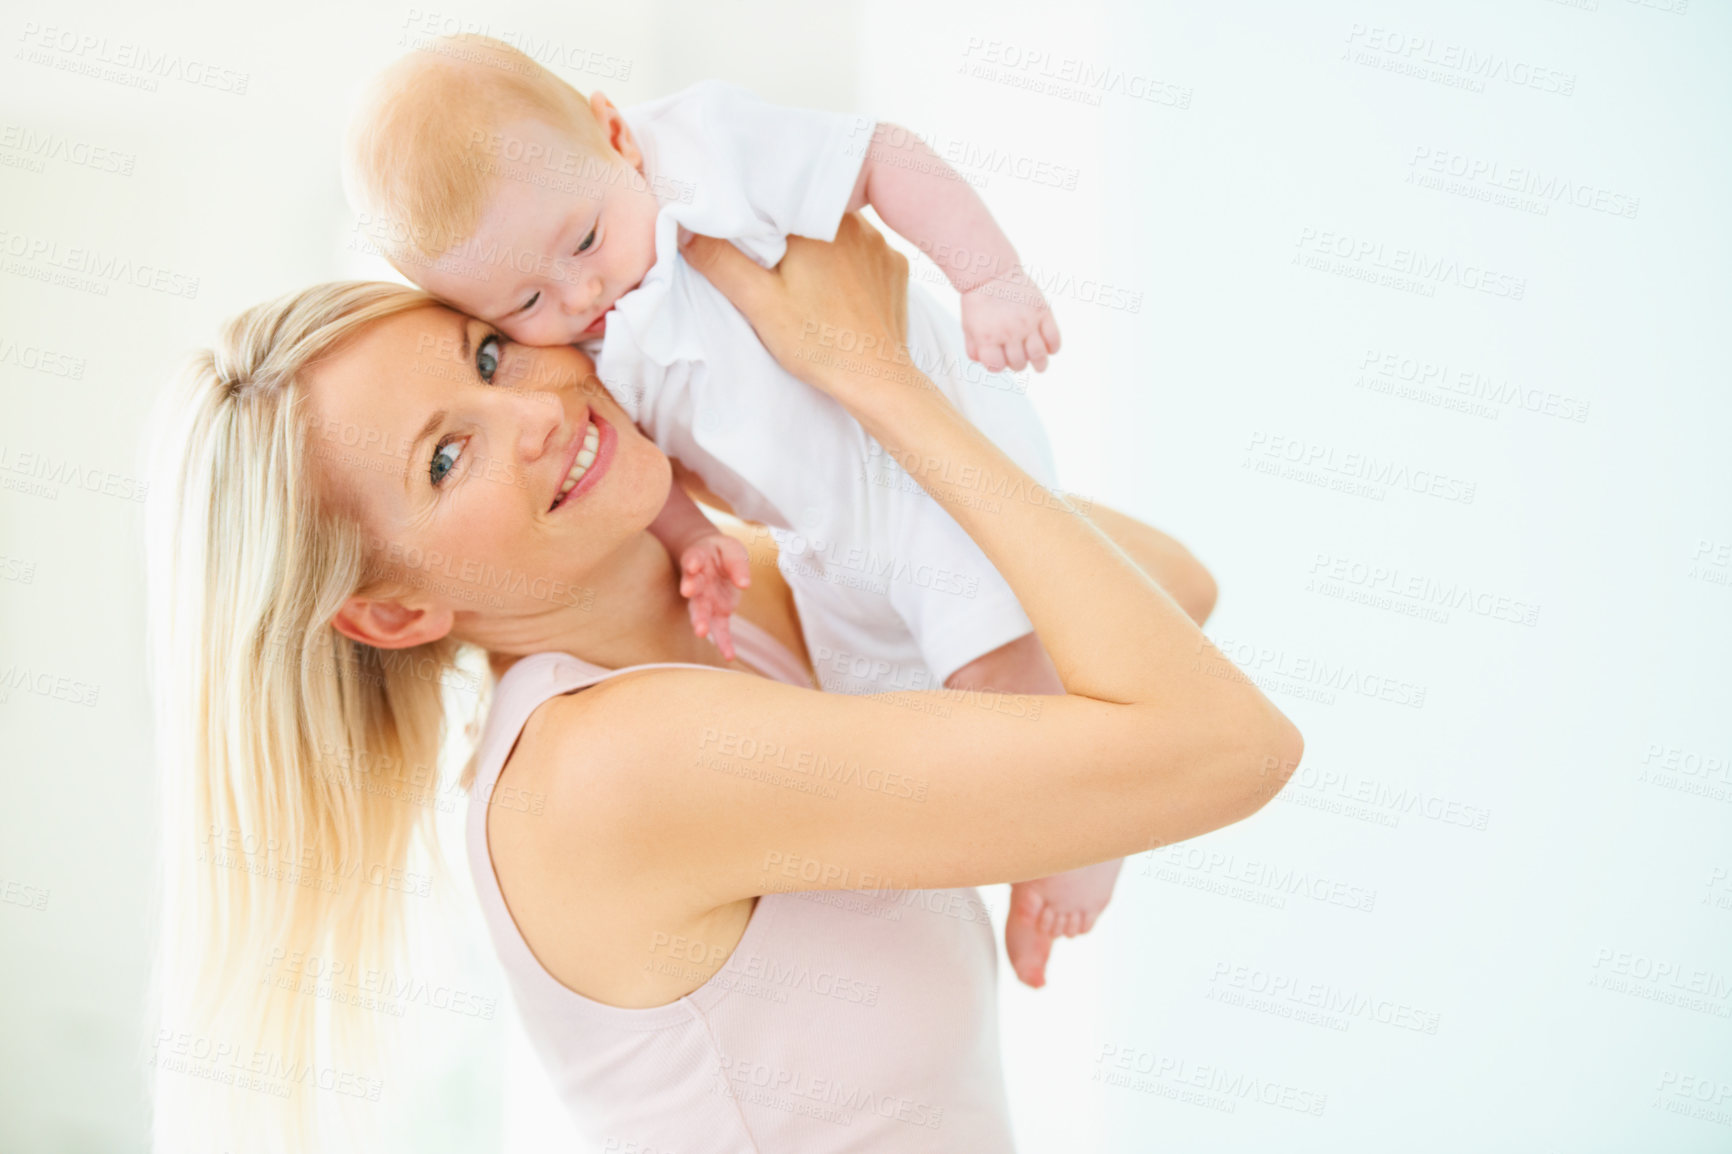 Buy stock photo A lovely mother lifting her adorable baby girl